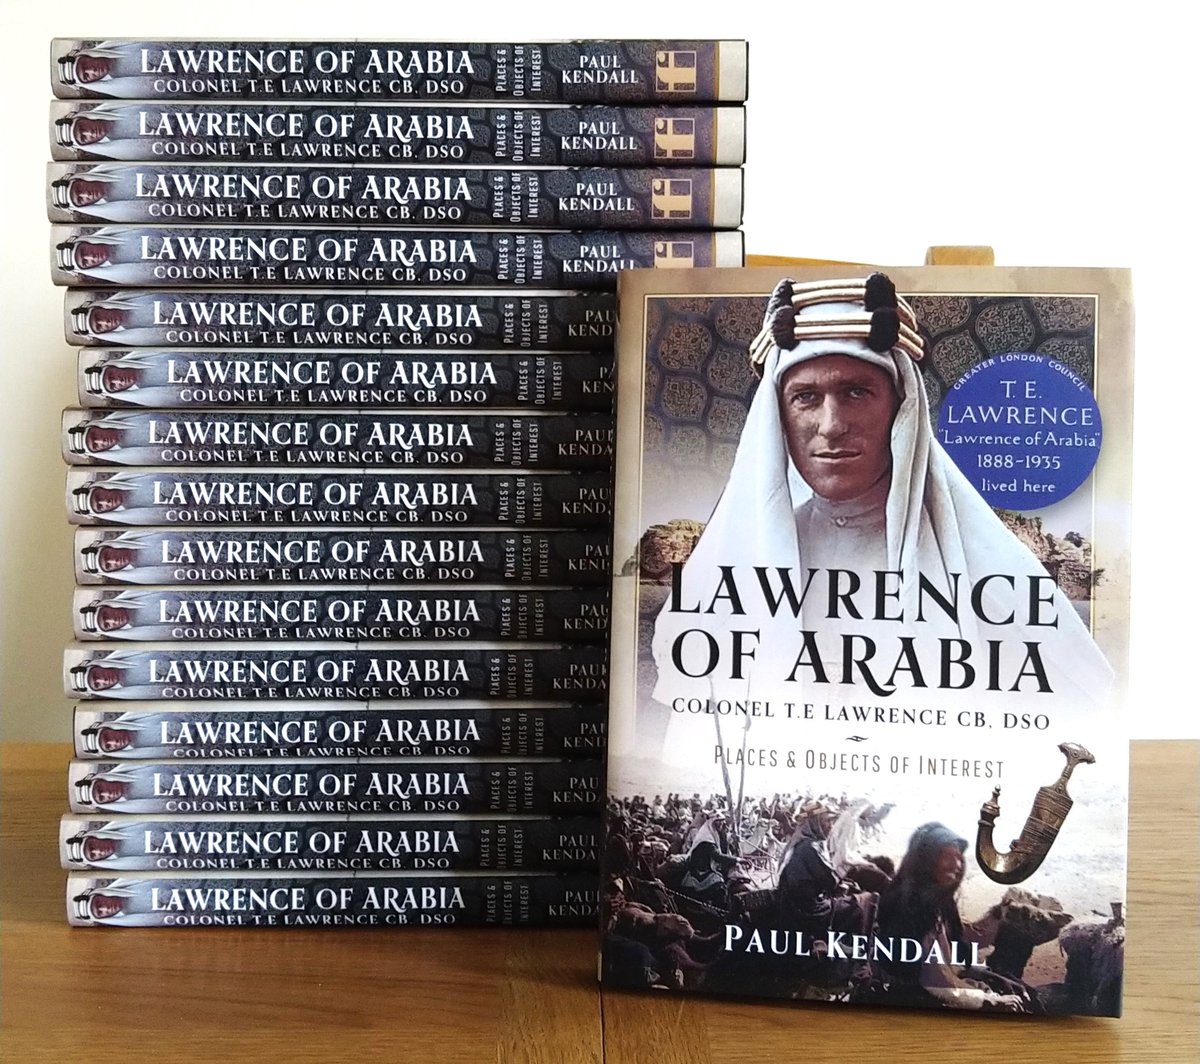 Lawrence of Arabia by Paul Kendall @penswordbooks

Save 20% off the RRP when you order your copy from @penswordbooks

buff.ly/47pzpSM

#LawrenceofArabia #TELawrence #Firstworldwar #worldwarone #RoyalAirForce #BritishArmy #History #MiddleEast #Biography #worldwarI…